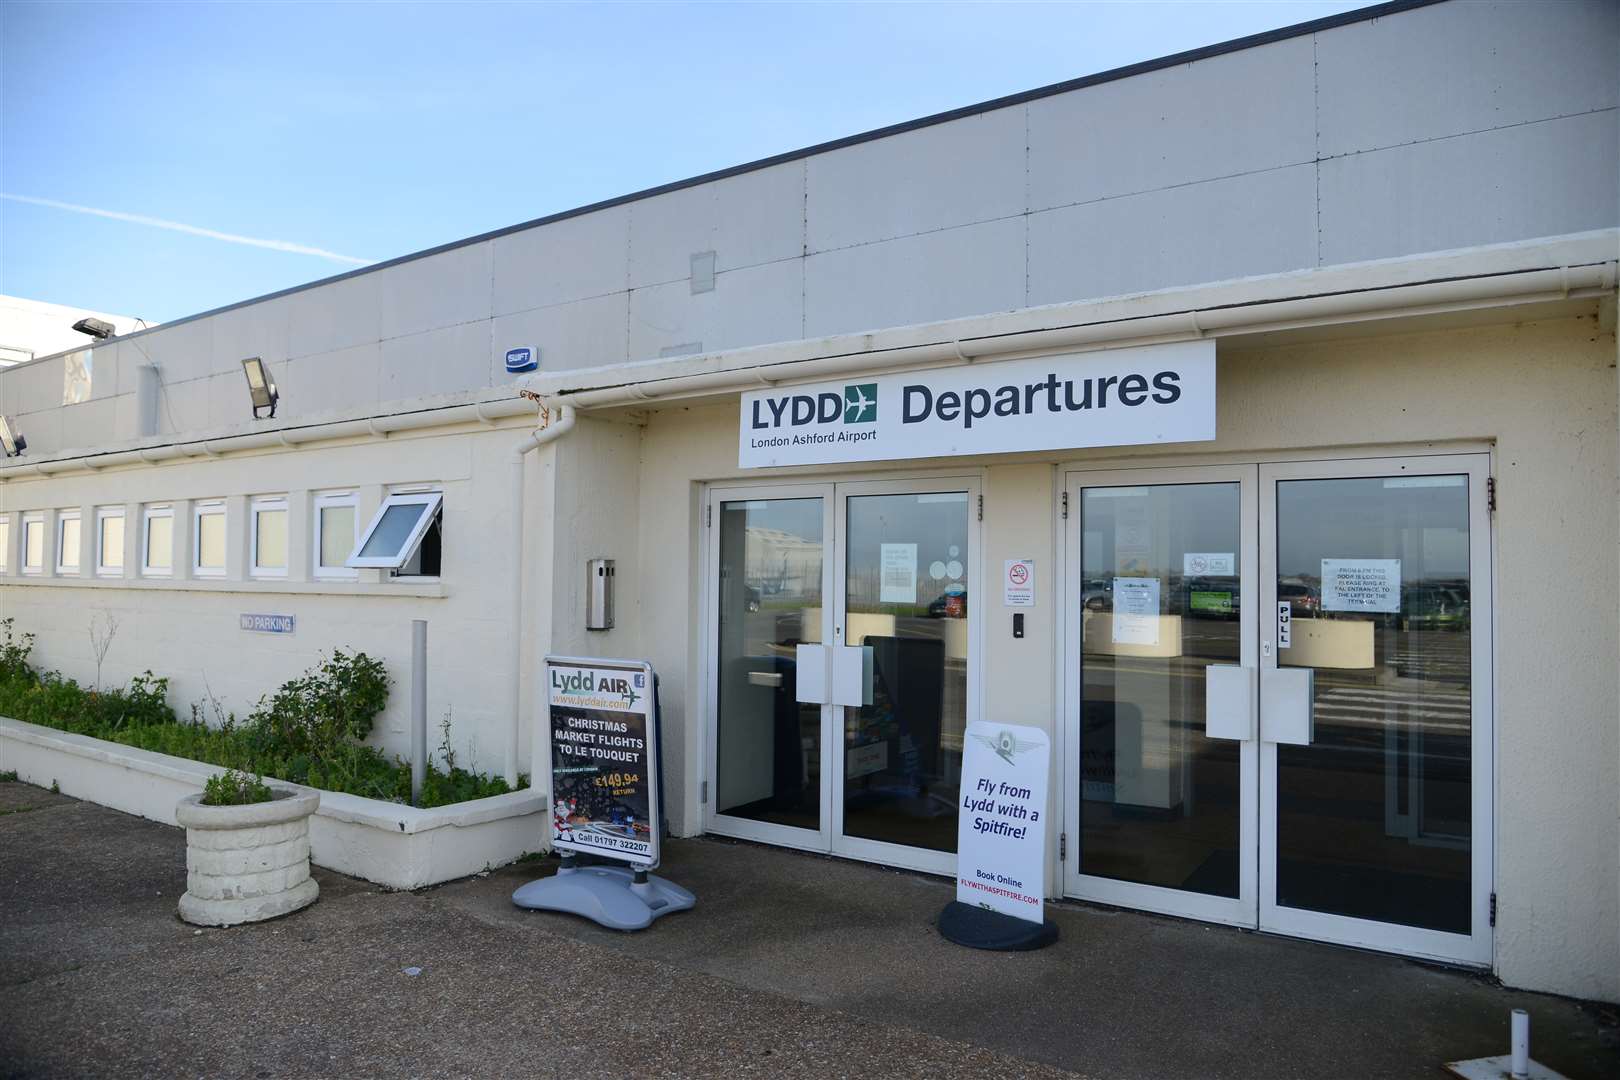 The departure lounge at Lydd airport